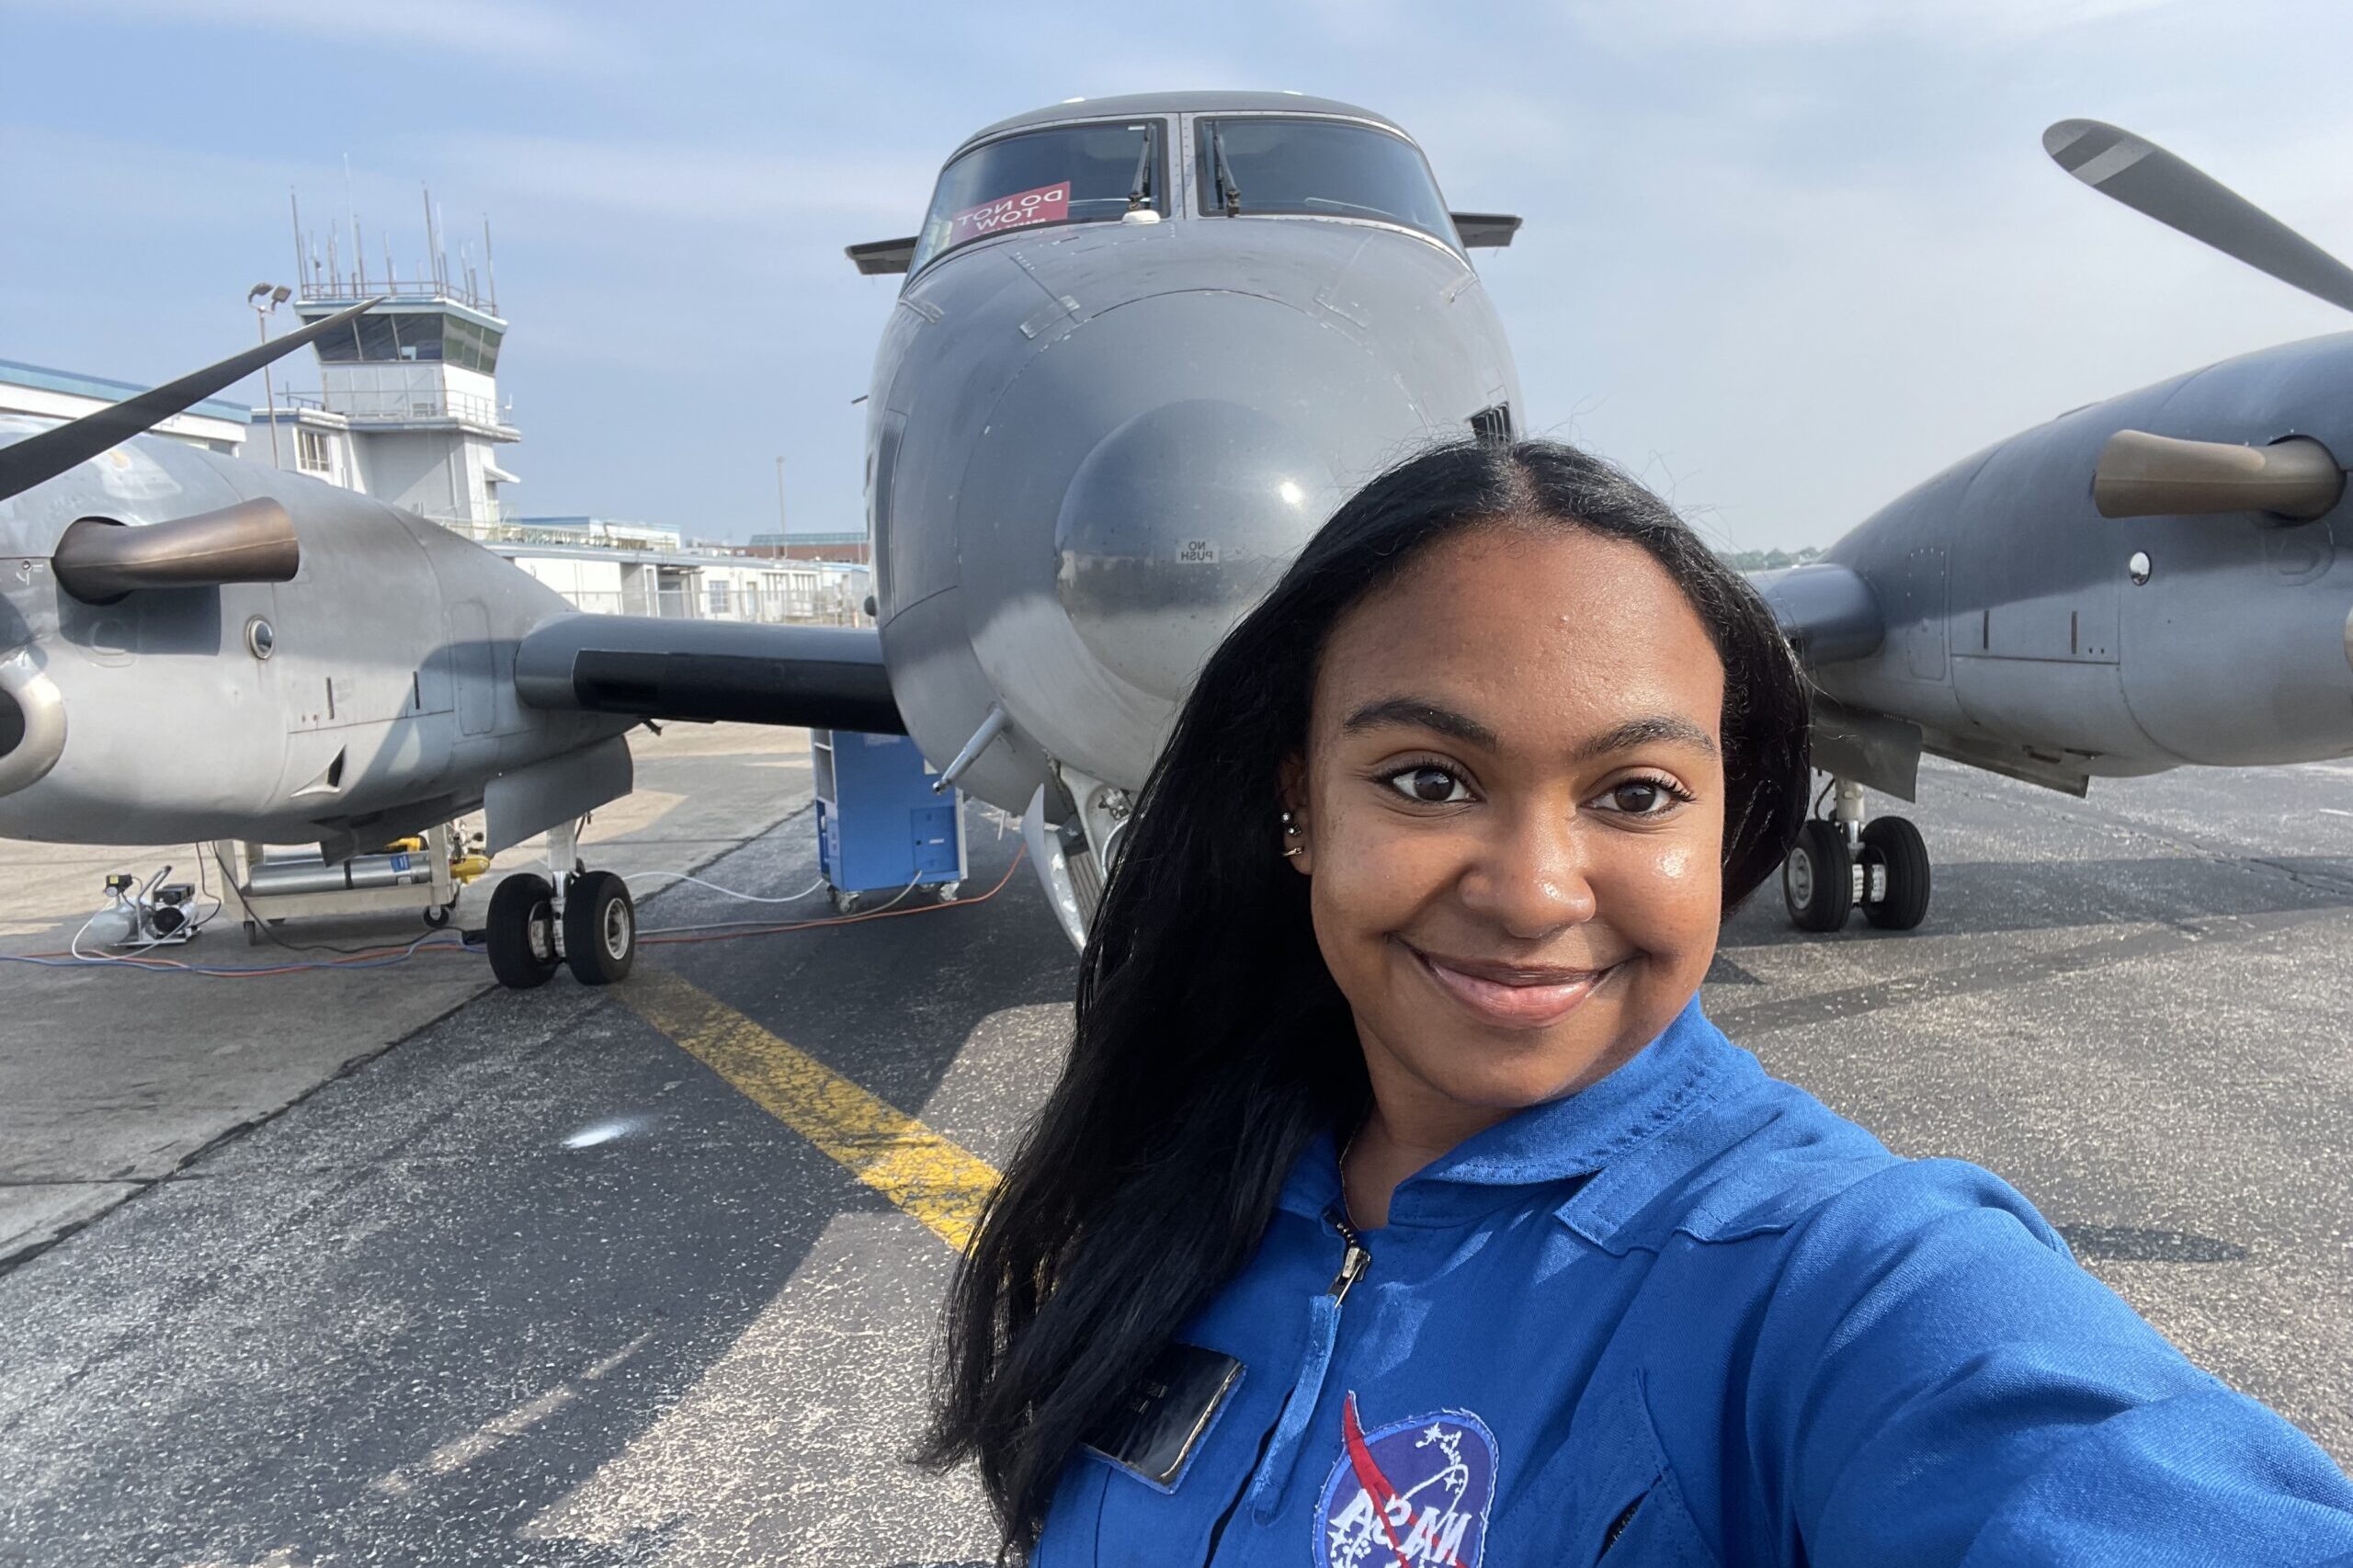 Victoria Jenkins taking a selfie in front of an airplane